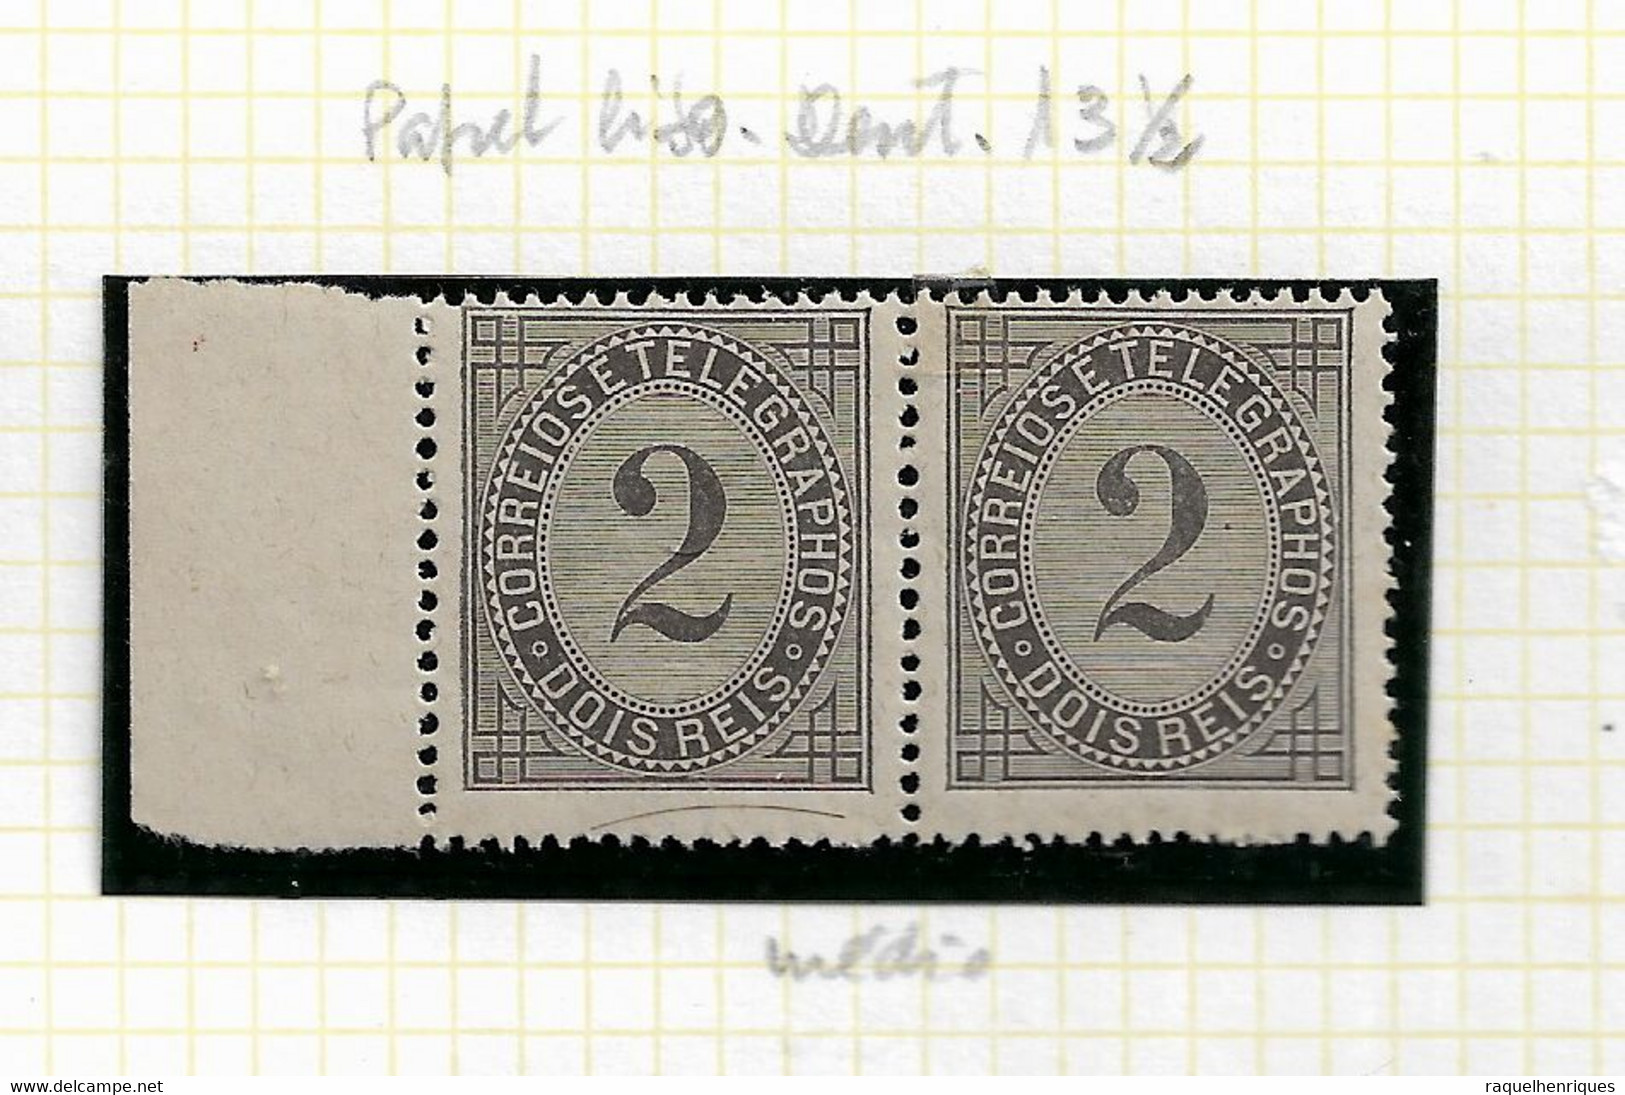 PORTUGAL STAMP - 1884 Telegraph Stamp P.LISO Perf:13½  Md#59a PAIR MNH (LPT1#195) - Unused Stamps